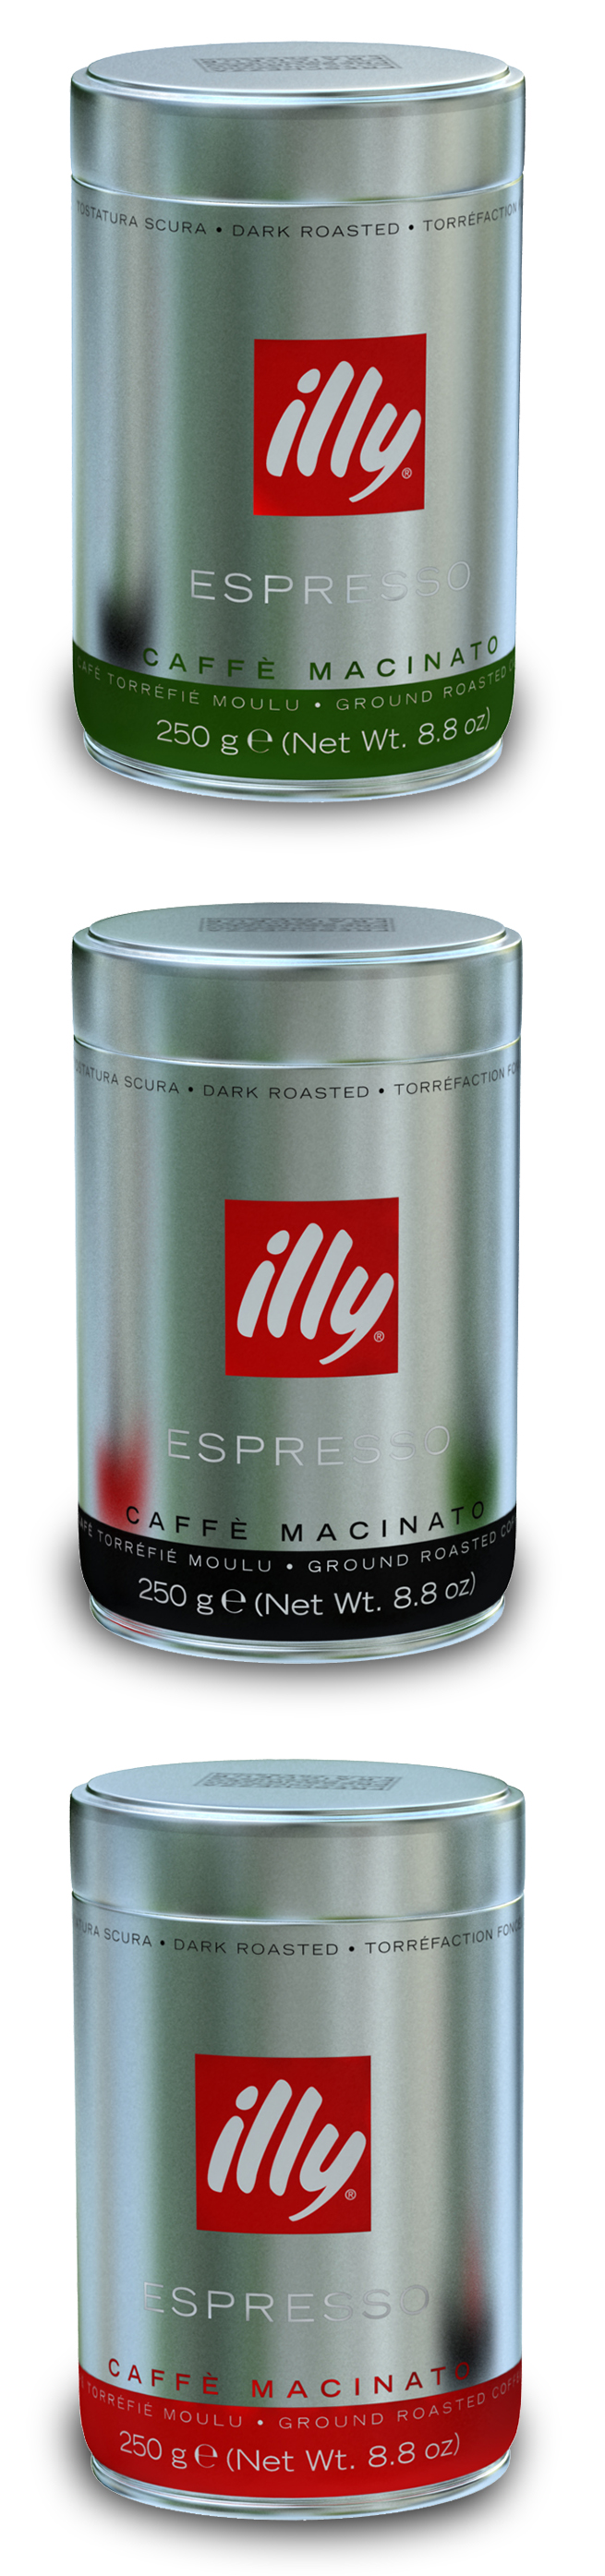 illy packaging